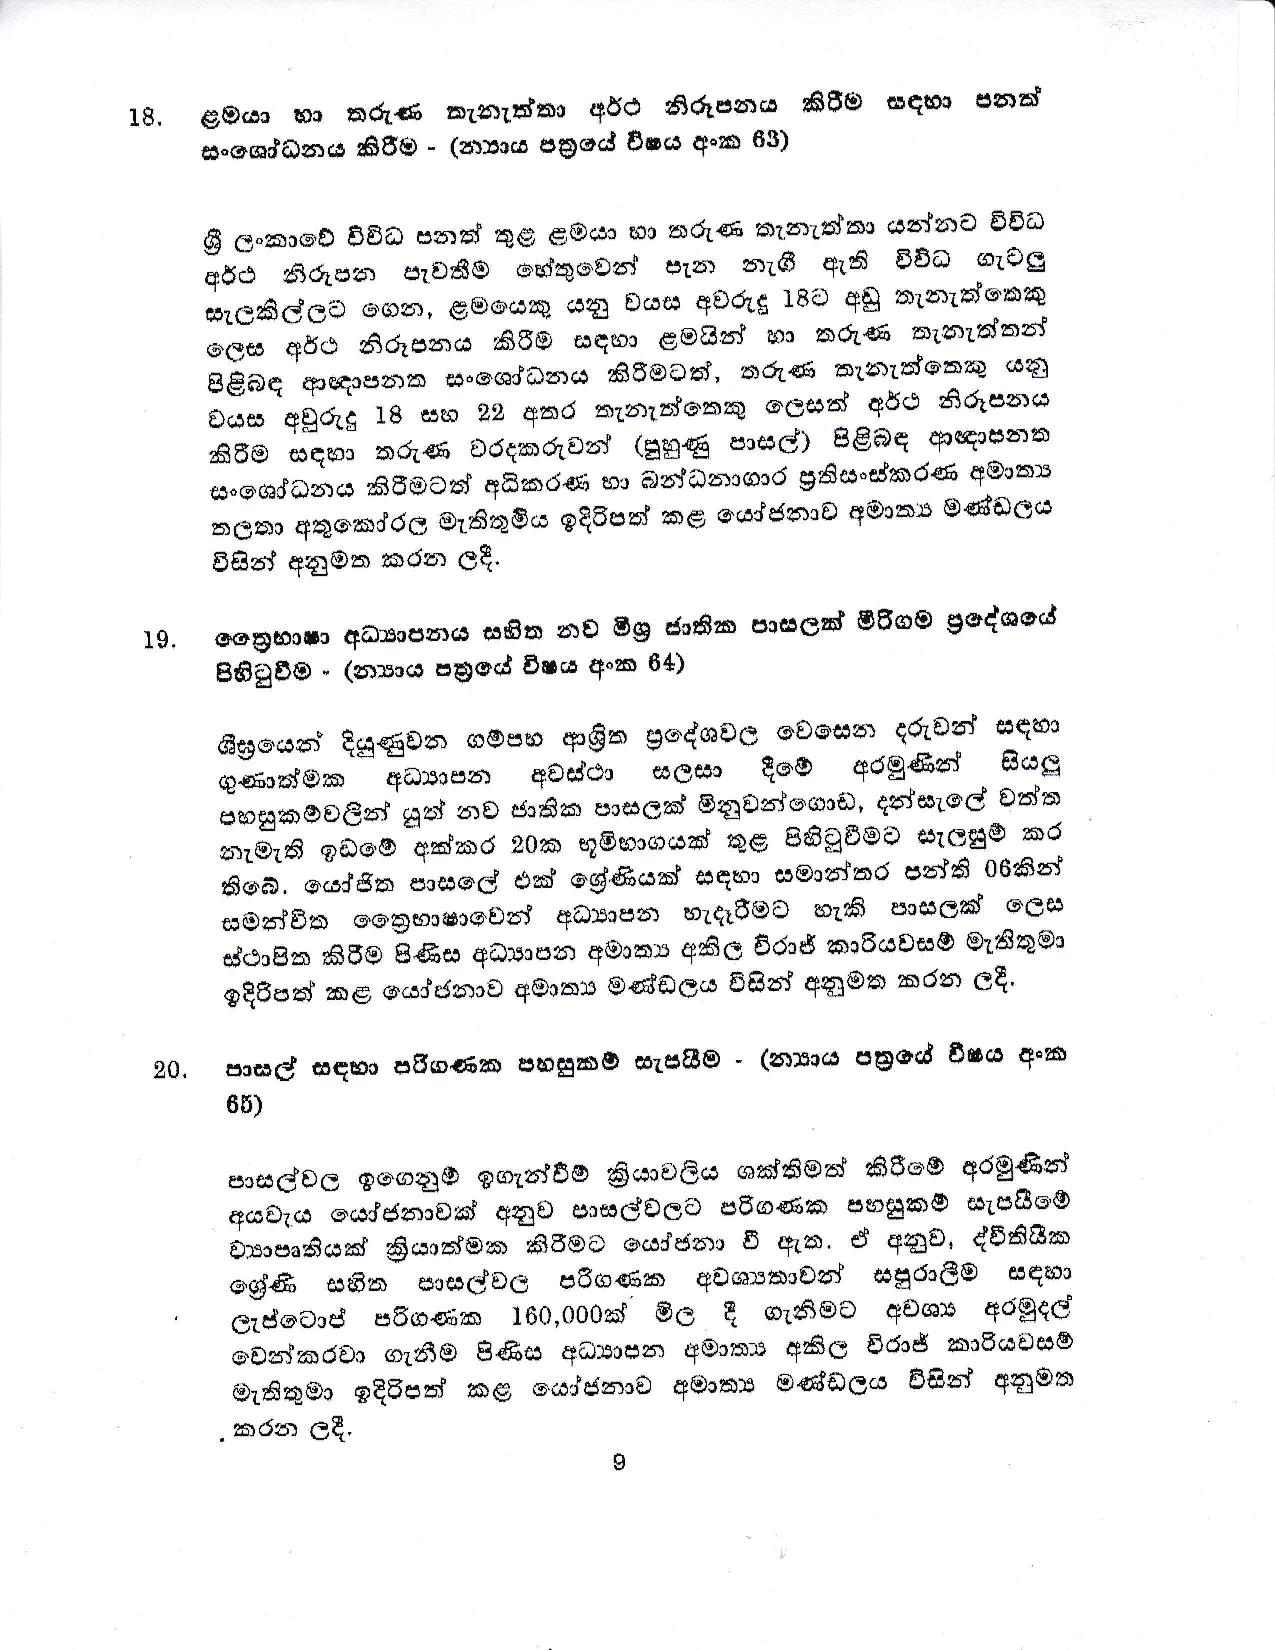 Cabinet Decision on 30.04.2019 page 009